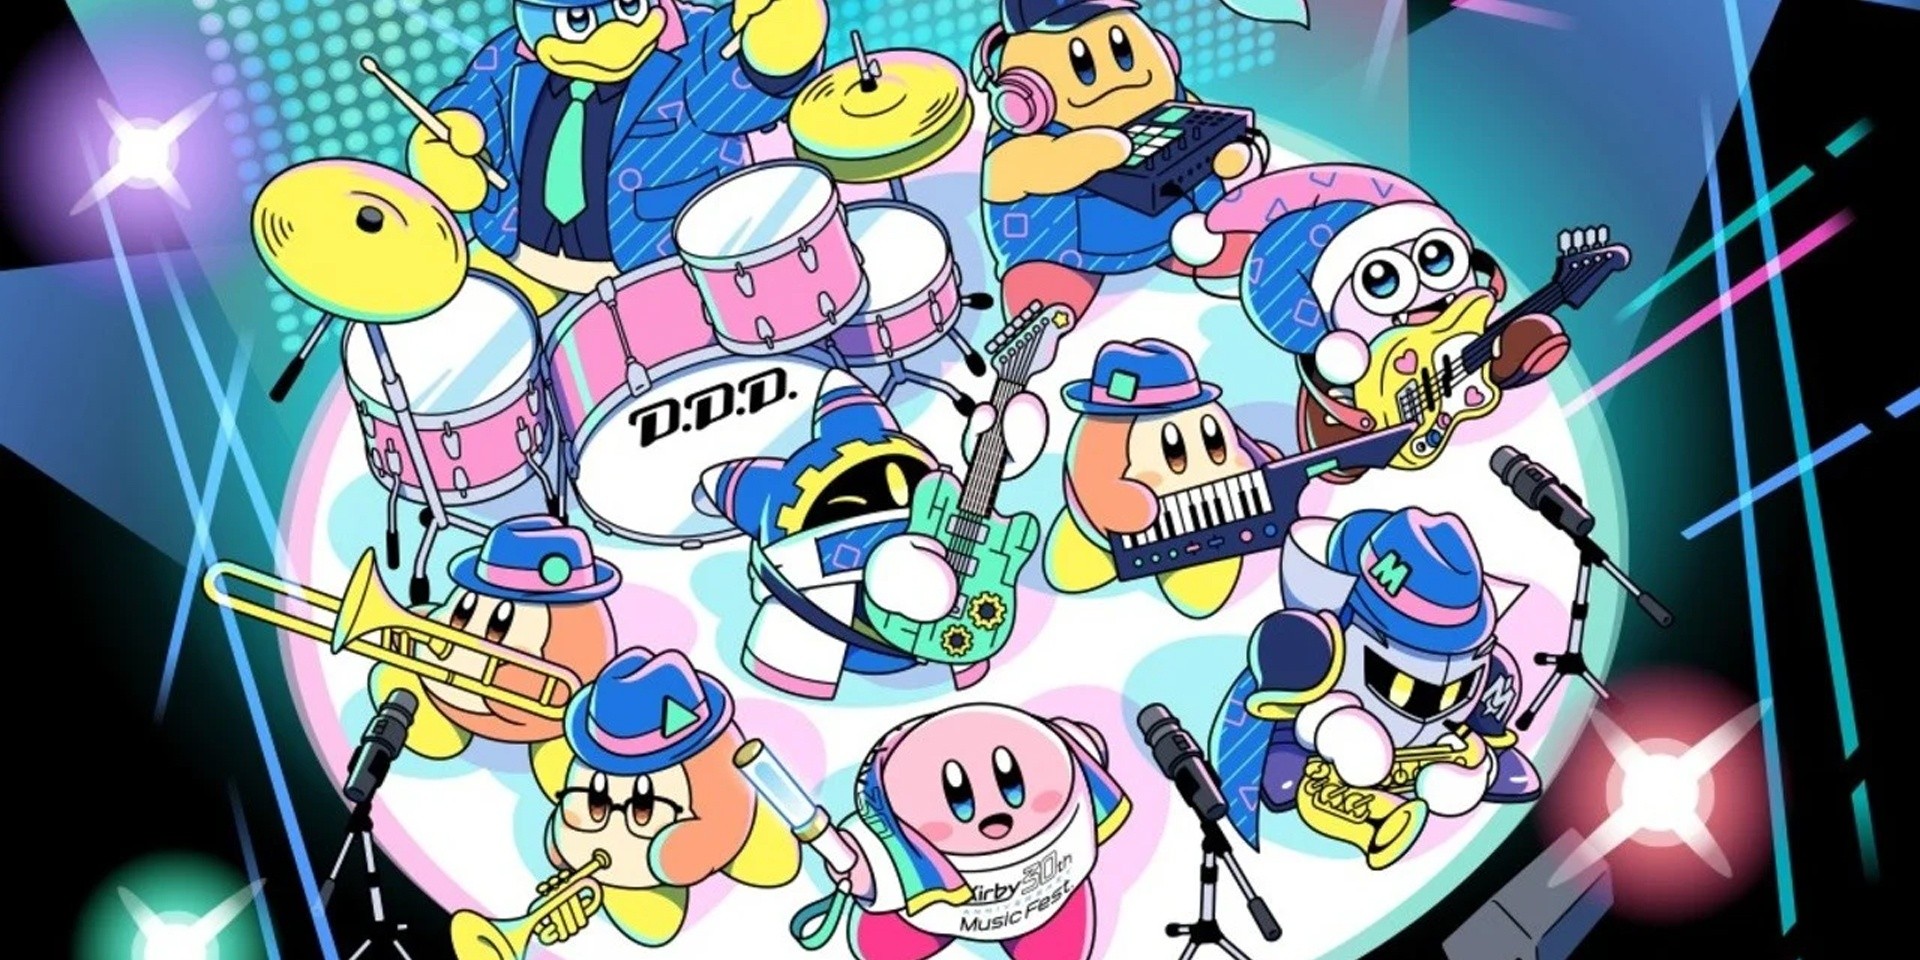 Kirby to celebrate 30th anniversary with global livestream concert |